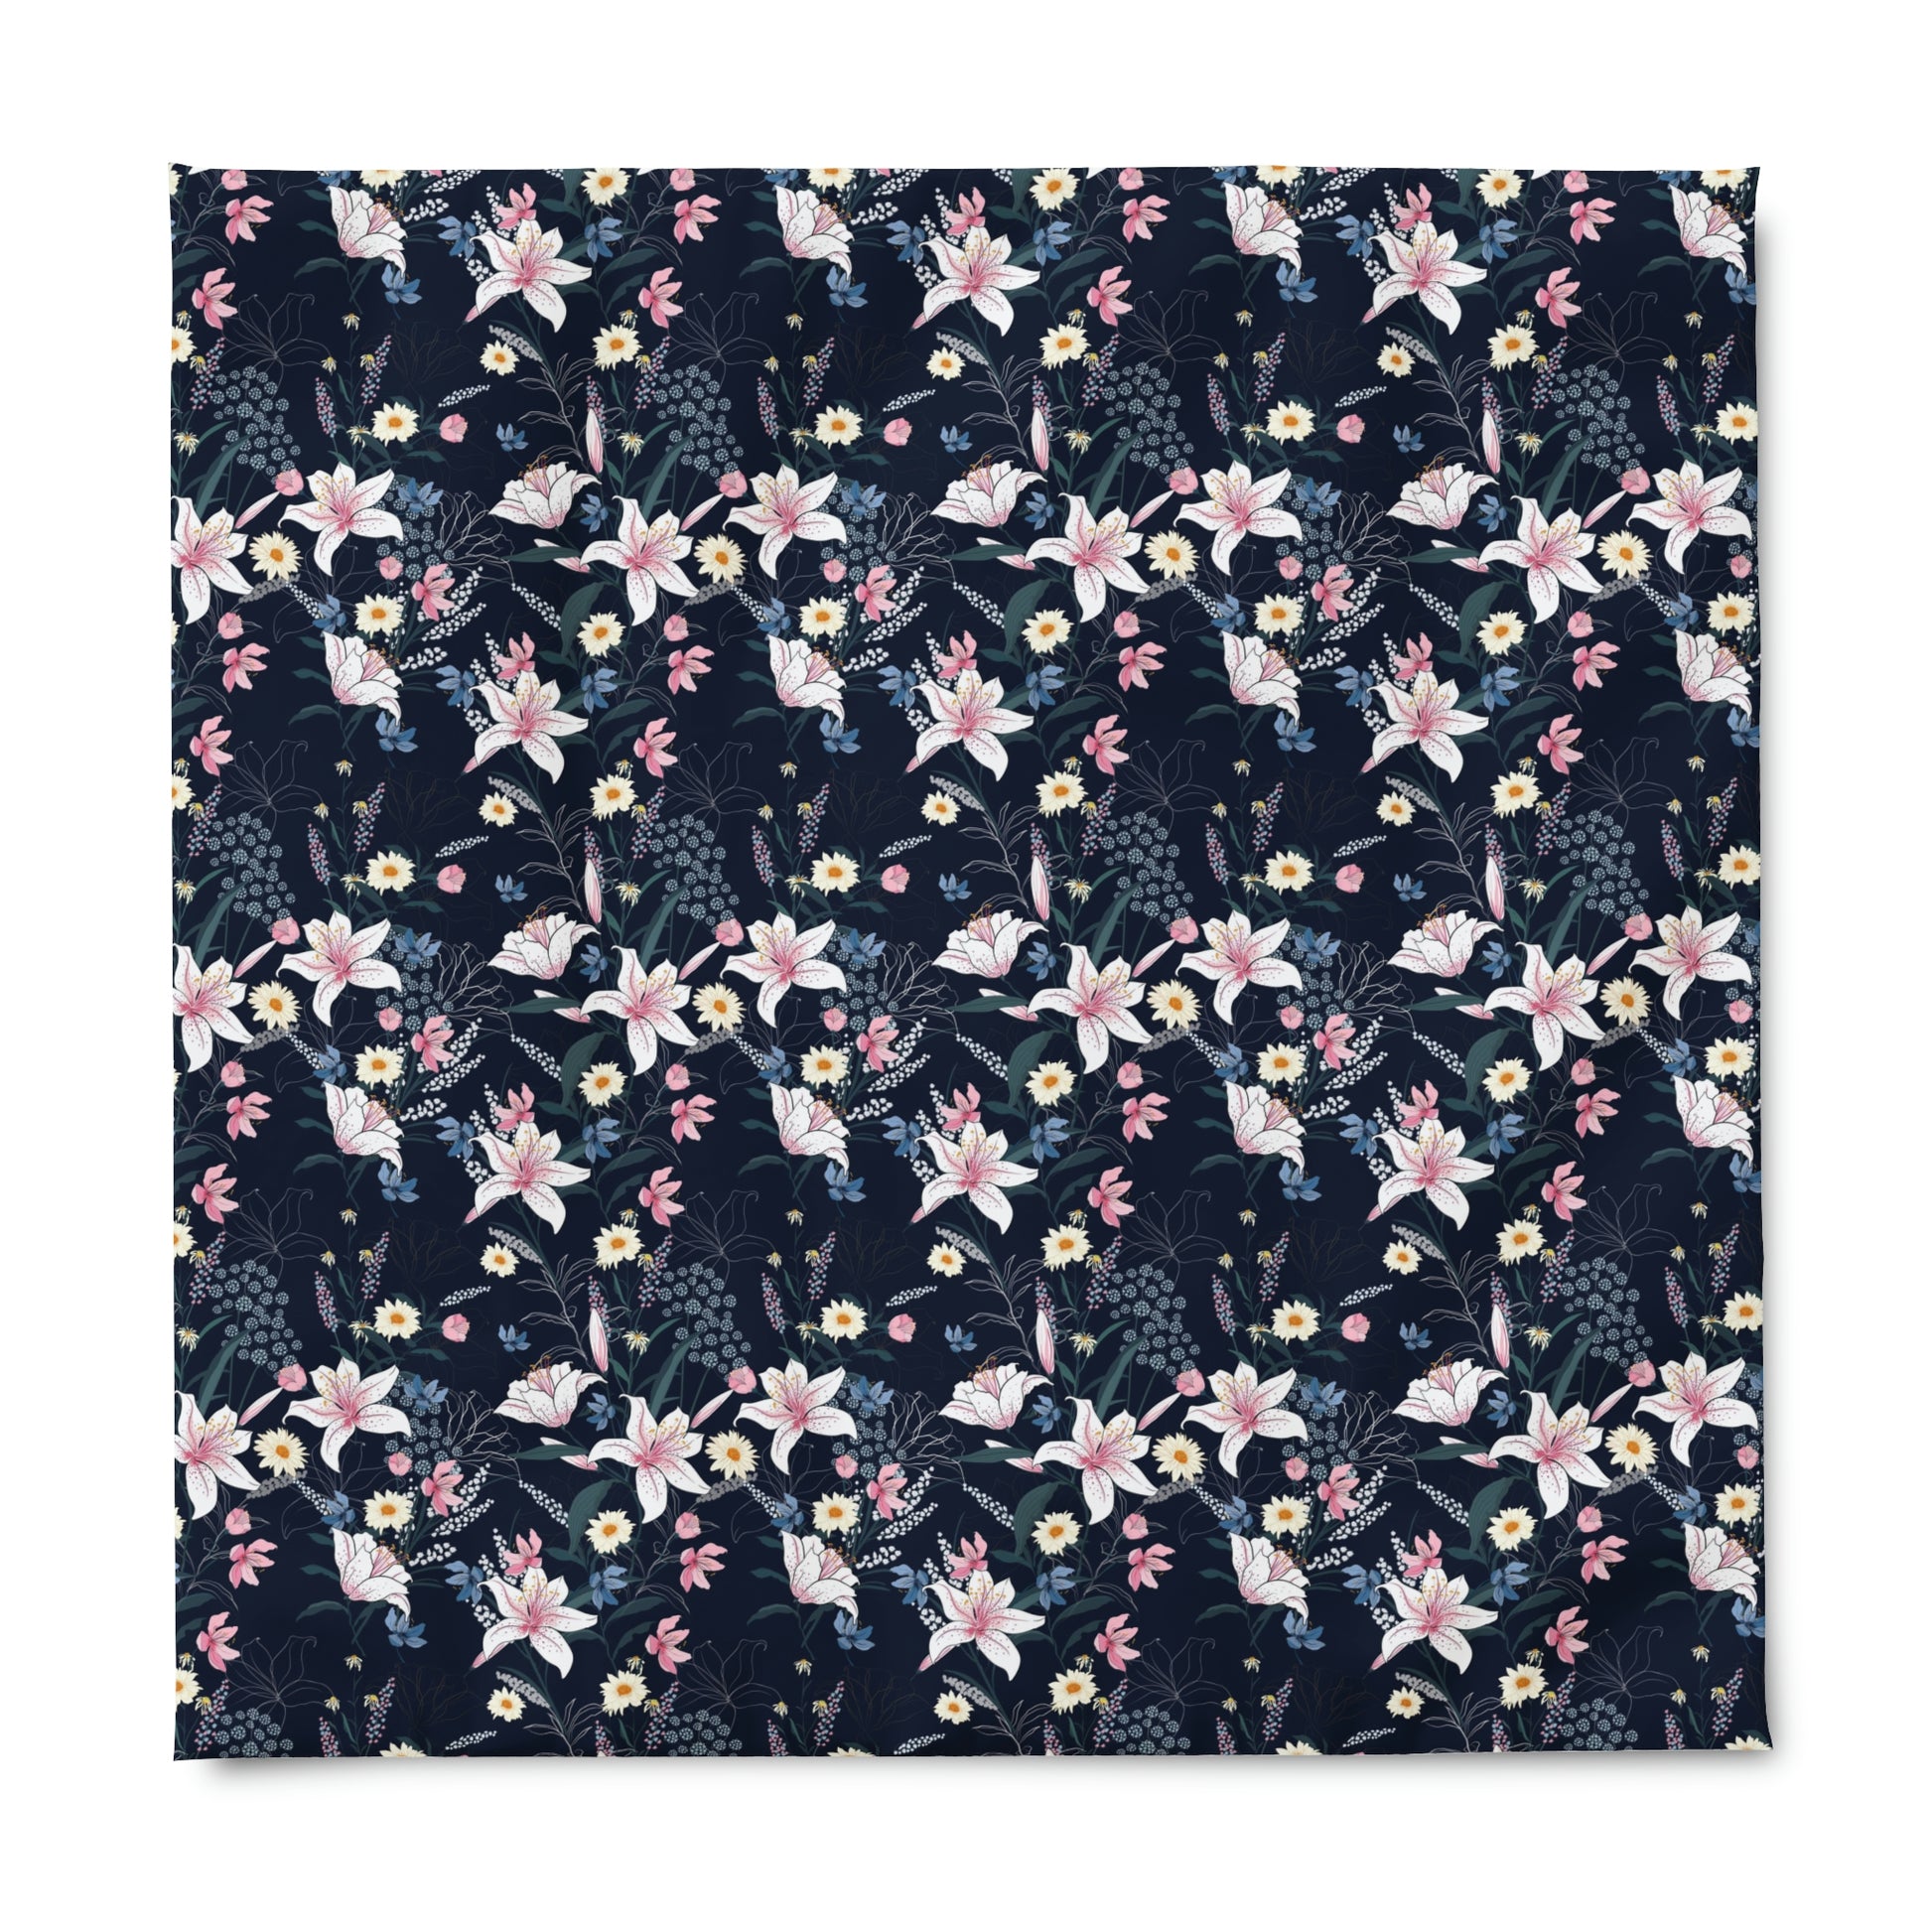 navy Blue & Pink Floral Pattern Duvet Cover lying on a bed, microfiber duvet cover bedroom accent